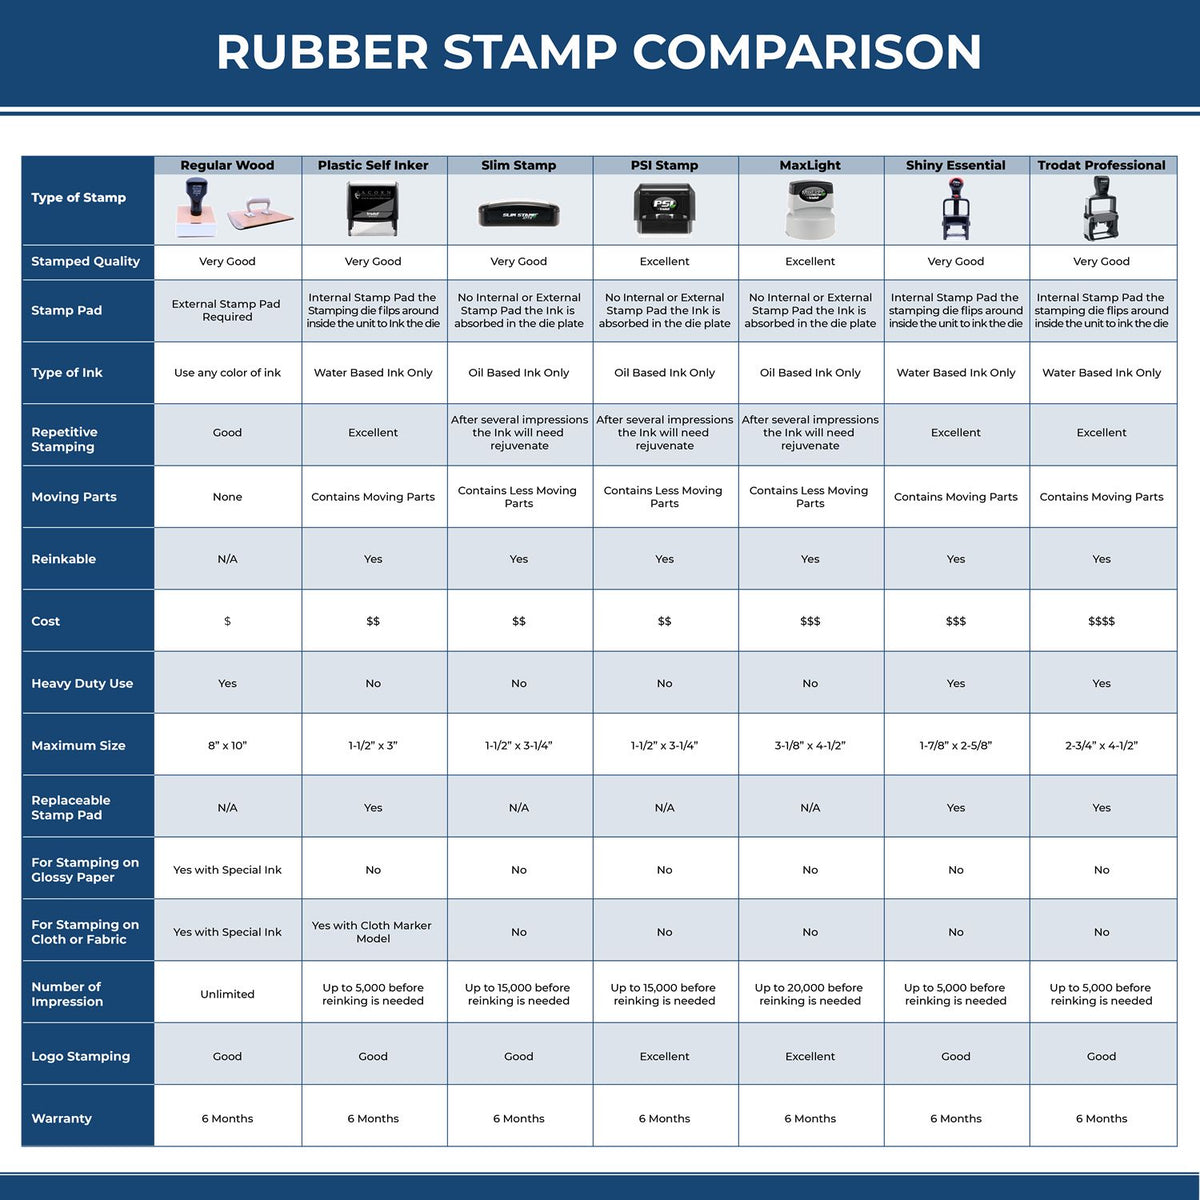 Architect Regular Rubber Stamp of Seal 3005ARC Rubber Stamp Comparison